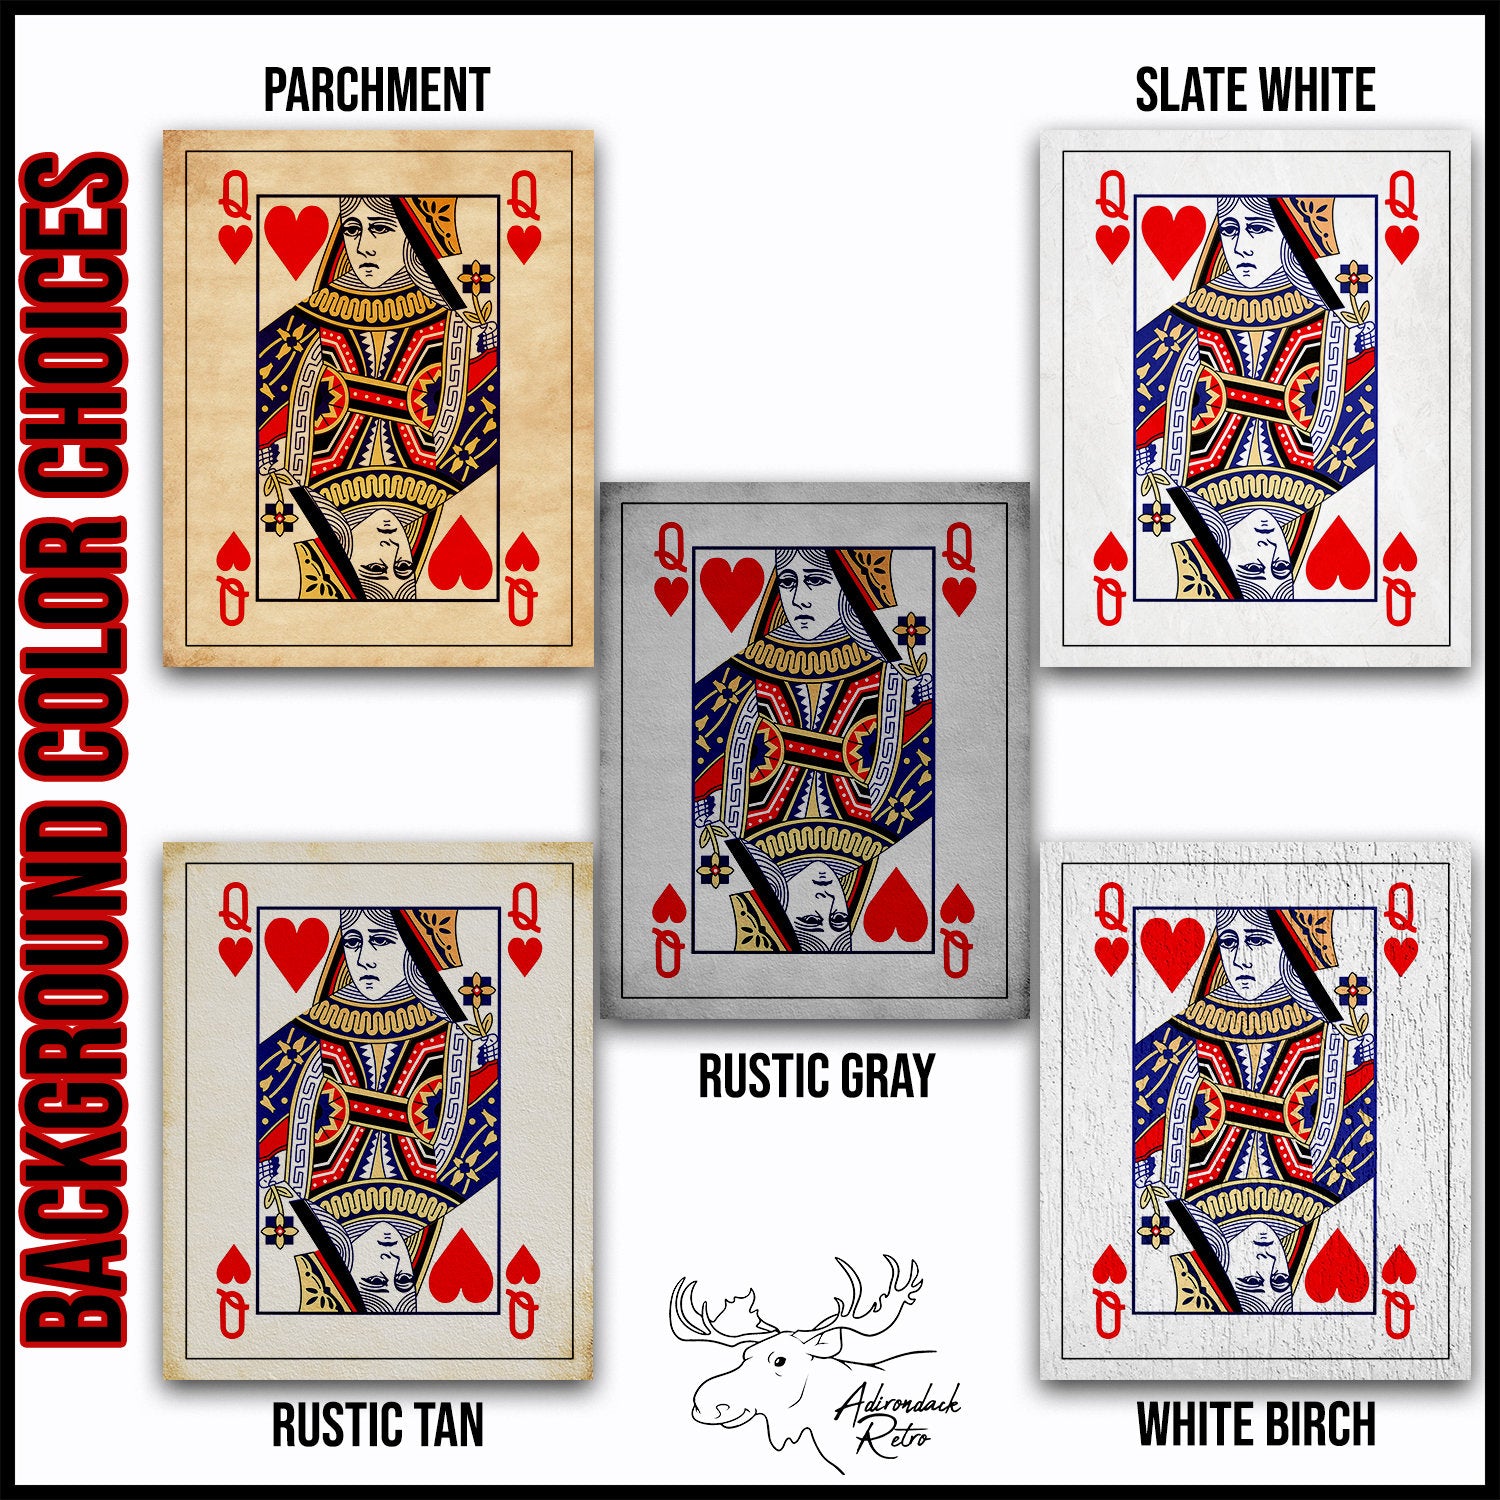 Ace and King of Clubs Playing Card Giclee Fine Art Prints - Big Slick - Black Jack